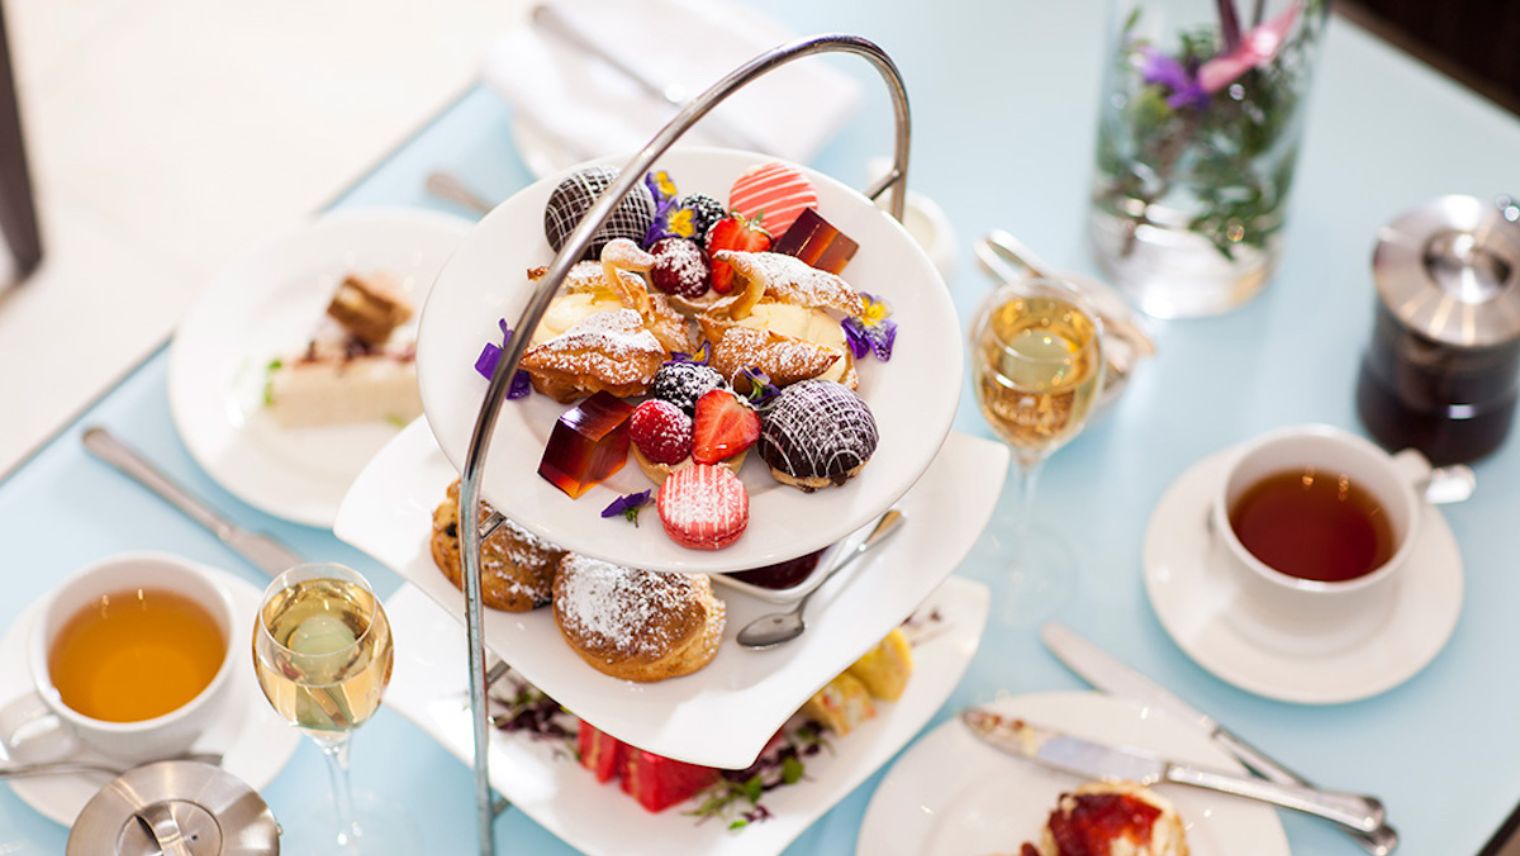 Tuck into an opulent afternoon tea